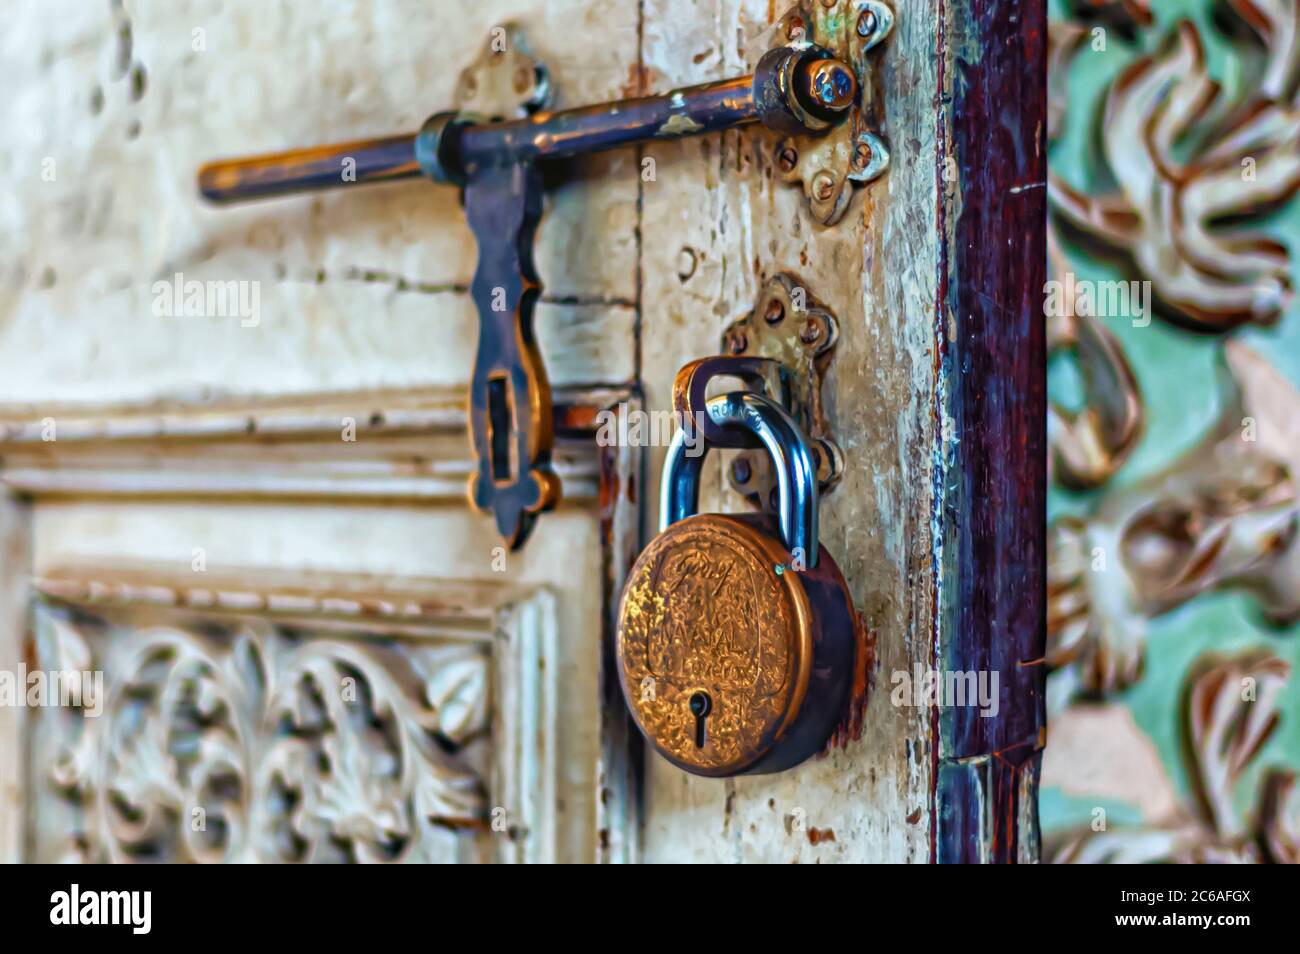 A brass padlock is suspended from a staple on a partially open door. An old fashioned and weather brass hasp is also visible in the image. Stock Photo